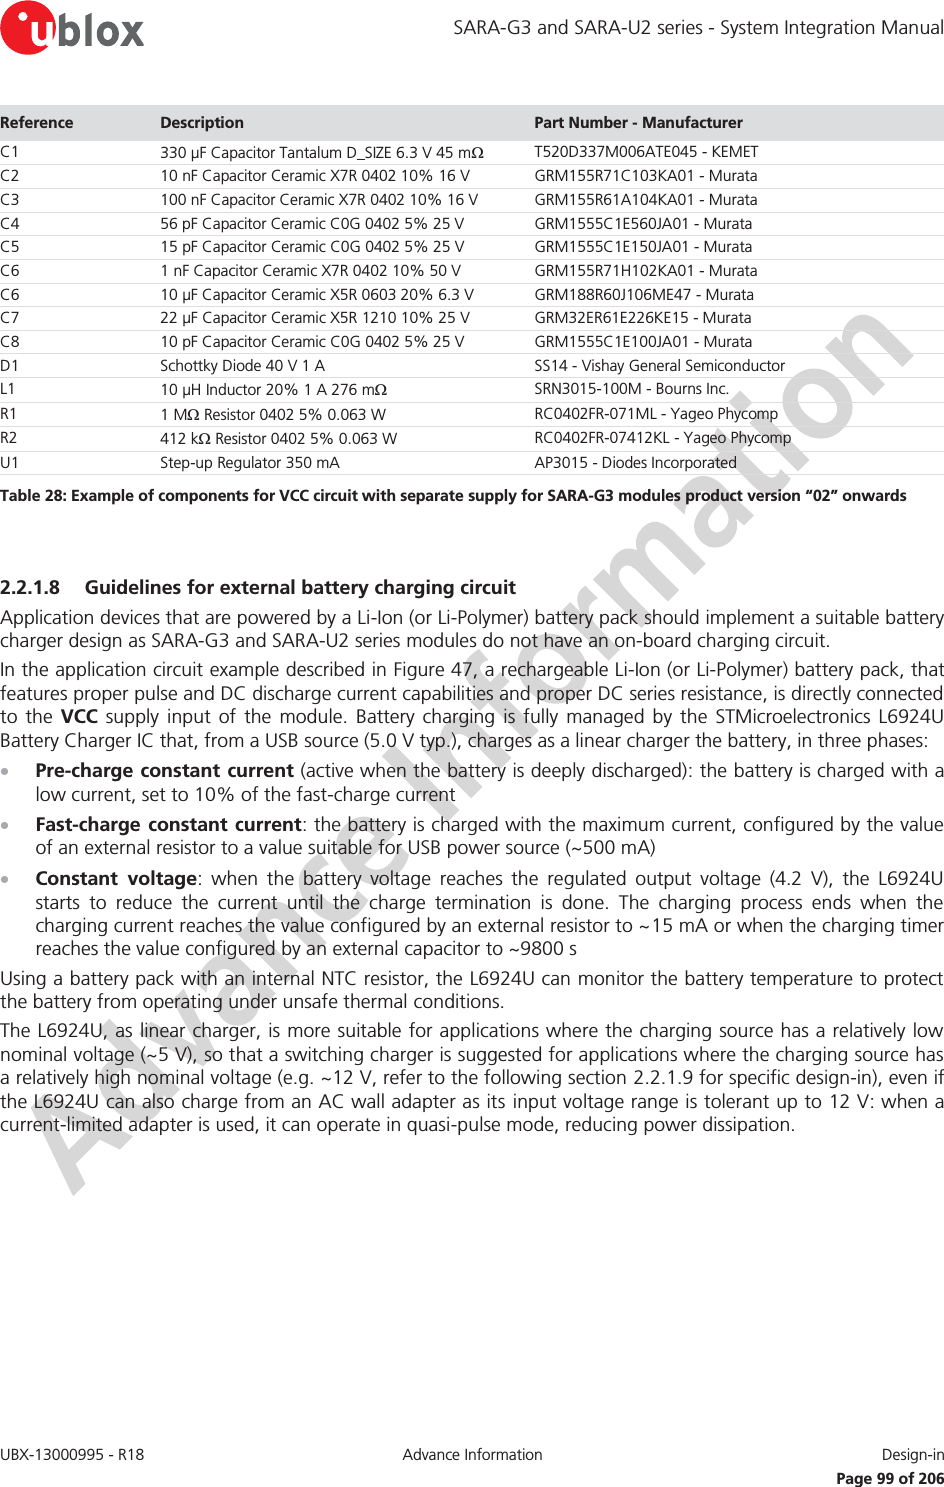 SARA-G3 and SARA-U2 series - System Integration Manual UBX-13000995 - R18  Advance Information  Design-in   Page 99 of 206 Reference  Description  Part Number - Manufacturer C1 330 μF Capacitor Tantalum D_SIZE 6.3 V 45 m: T520D337M006ATE045 - KEMET C2 10 nF Capacitor Ceramic X7R 0402 10% 16 V GRM155R71C103KA01 - Murata C3 100 nF Capacitor Ceramic X7R 0402 10% 16 V GRM155R61A104KA01 - Murata C4 56 pF Capacitor Ceramic C0G 0402 5% 25 V GRM1555C1E560JA01 - Murata C5 15 pF Capacitor Ceramic C0G 0402 5% 25 V  GRM1555C1E150JA01 - Murata C6 1 nF Capacitor Ceramic X7R 0402 10% 50 V GRM155R71H102KA01 - Murata C6 10 μF Capacitor Ceramic X5R 0603 20% 6.3 V GRM188R60J106ME47 - Murata C7 22 μF Capacitor Ceramic X5R 1210 10% 25 V GRM32ER61E226KE15 - Murata C8 10 pF Capacitor Ceramic C0G 0402 5% 25 V  GRM1555C1E100JA01 - Murata D1 Schottky Diode 40 V 1 A SS14 - Vishay General Semiconductor L1 10 μH Inductor 20% 1 A 276 m: SRN3015-100M - Bourns Inc. R1 1 M: Resistor 0402 5% 0.063 W RC0402FR-071ML - Yageo Phycomp R2 412 k: Resistor 0402 5% 0.063 W RC0402FR-07412KL - Yageo Phycomp U1 Step-up Regulator 350 mA AP3015 - Diodes Incorporated Table 28: Example of components for VCC circuit with separate supply for SARA-G3 modules product version “02” onwards  2.2.1.8 Guidelines for external battery charging circuit Application devices that are powered by a Li-Ion (or Li-Polymer) battery pack should implement a suitable battery charger design as SARA-G3 and SARA-U2 series modules do not have an on-board charging circuit. In the application circuit example described in Figure 47, a rechargeable Li-Ion (or Li-Polymer) battery pack, that features proper pulse and DC discharge current capabilities and proper DC series resistance, is directly connected to the VCC supply input of the module. Battery charging is fully managed by the STMicroelectronics L6924U Battery Charger IC that, from a USB source (5.0 V typ.), charges as a linear charger the battery, in three phases: x Pre-charge constant current (active when the battery is deeply discharged): the battery is charged with a low current, set to 10% of the fast-charge current x Fast-charge constant current: the battery is charged with the maximum current, configured by the value of an external resistor to a value suitable for USB power source (~500 mA) x Constant voltage: when the battery voltage reaches the regulated output voltage (4.2 V), the L6924U starts to reduce the current until the charge termination is done. The charging process ends when the charging current reaches the value configured by an external resistor to ~15 mA or when the charging timer reaches the value configured by an external capacitor to ~9800 s Using a battery pack with an internal NTC resistor, the L6924U can monitor the battery temperature to protect the battery from operating under unsafe thermal conditions. The L6924U, as linear charger, is more suitable for applications where the charging source has a relatively low nominal voltage (~5 V), so that a switching charger is suggested for applications where the charging source has a relatively high nominal voltage (e.g. ~12 V, refer to the following section 2.2.1.9 for specific design-in), even if the L6924U can also charge from an AC wall adapter as its input voltage range is tolerant up to 12 V: when a current-limited adapter is used, it can operate in quasi-pulse mode, reducing power dissipation.  